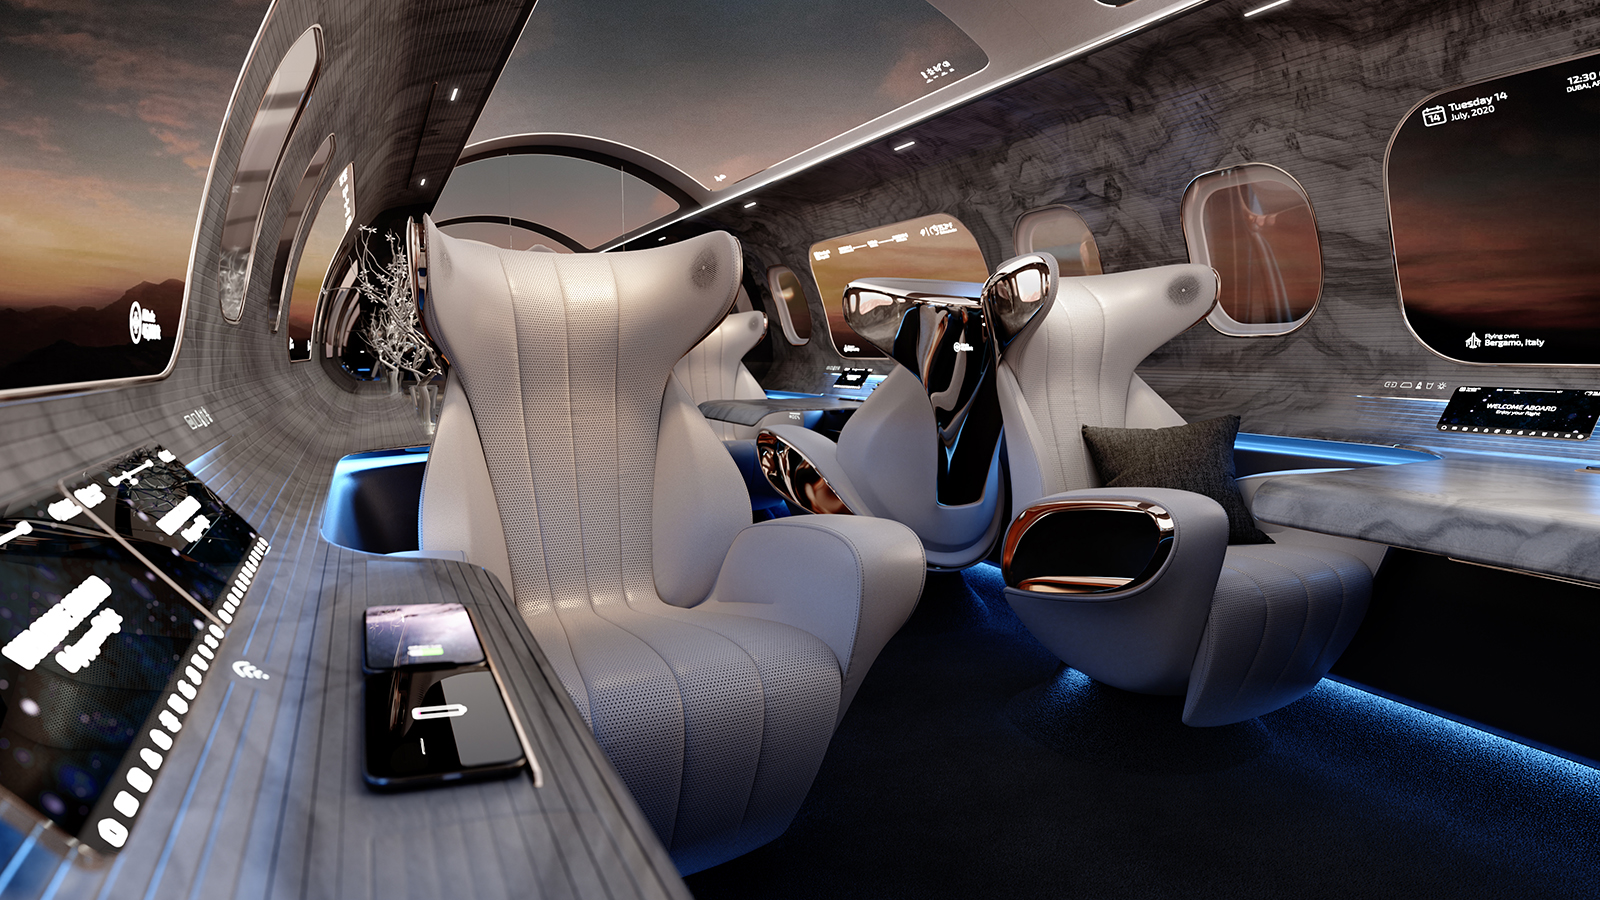 inside future airplanes